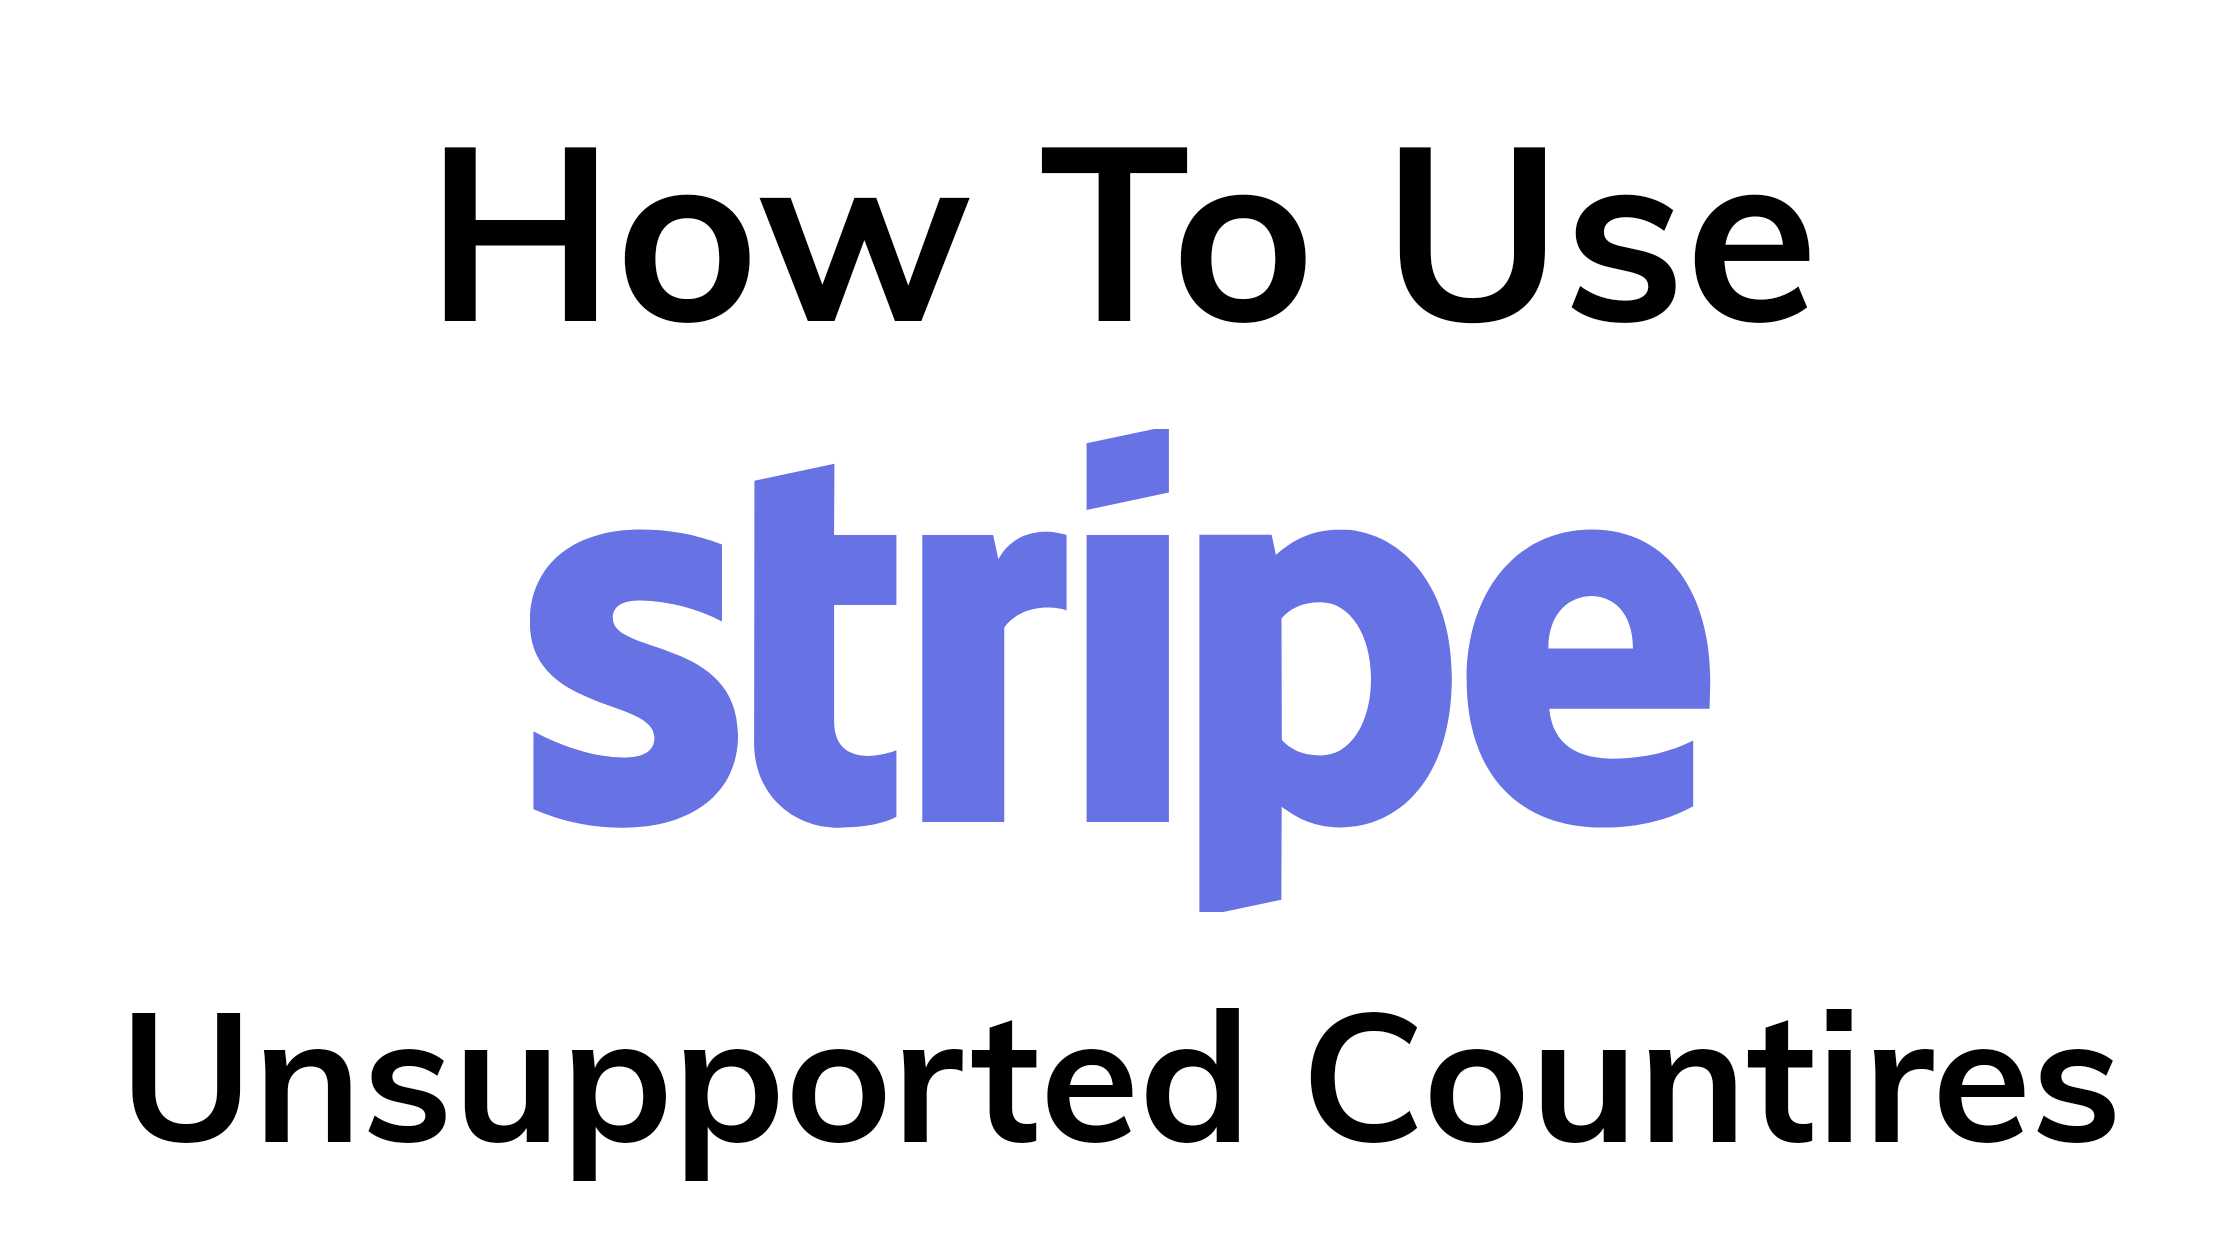 How to create stripe account in unsupported countries?